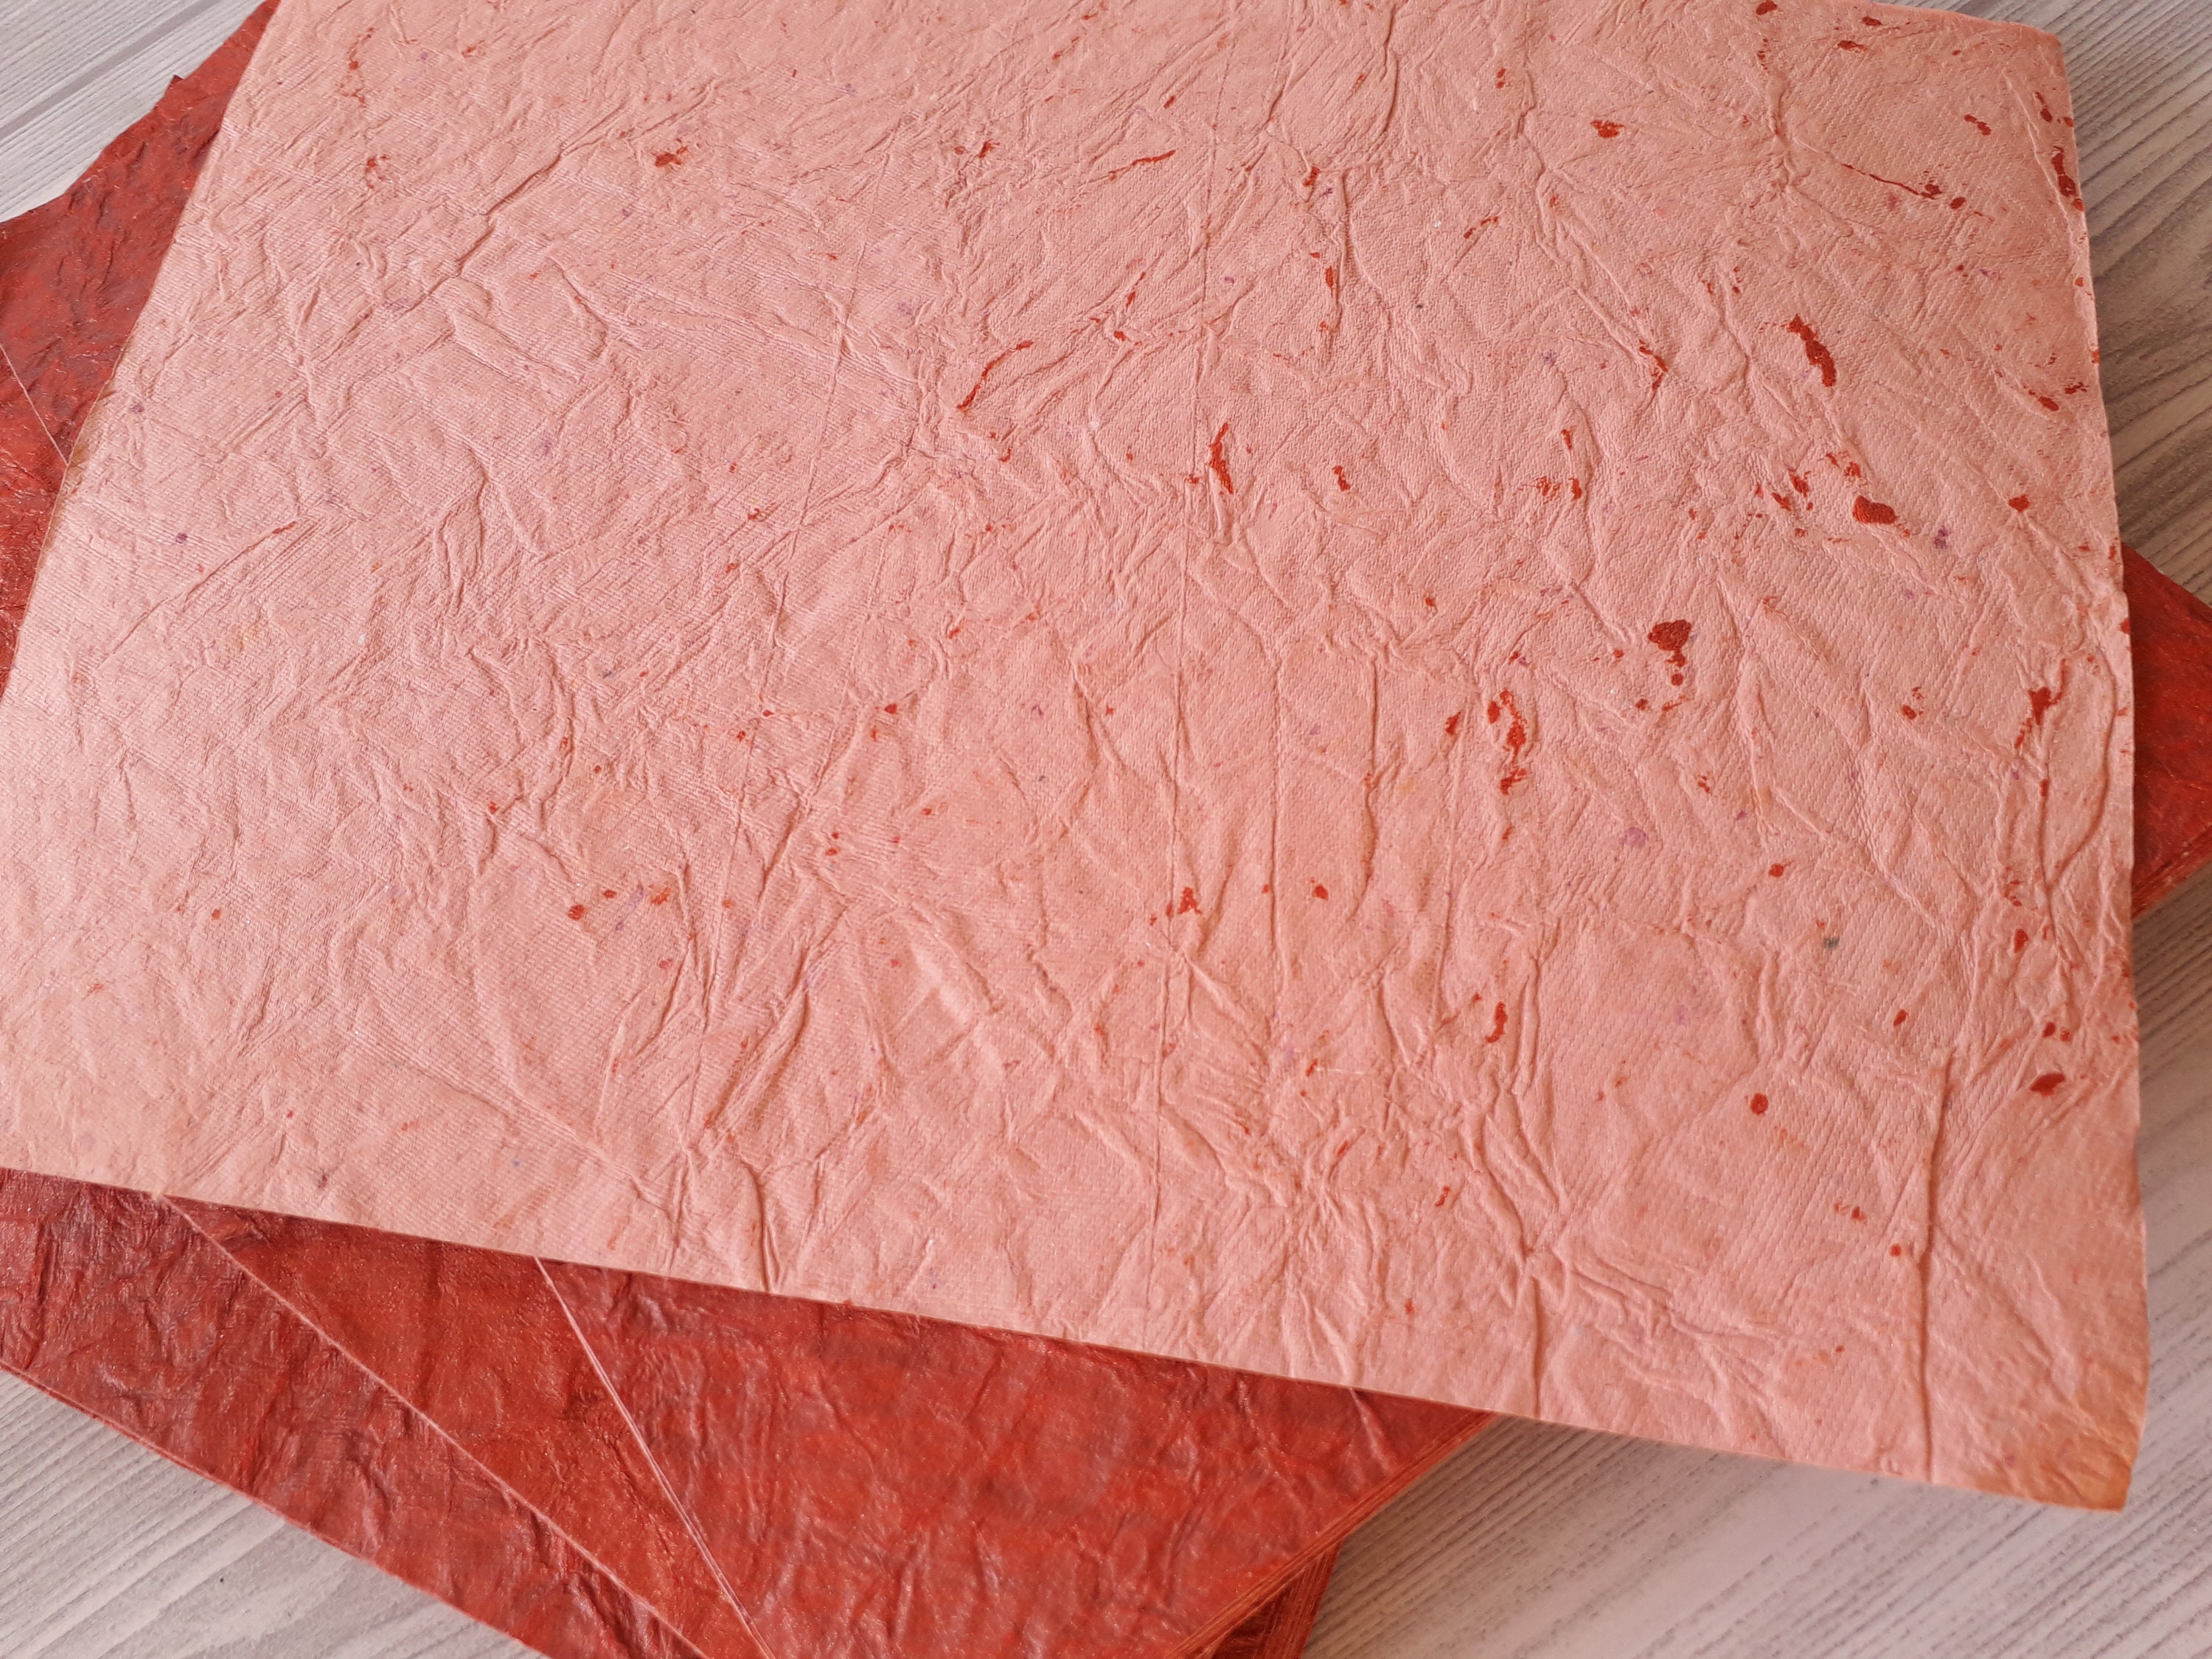 Wrinkled Texture Handmade Paper/ 220 gsm A4 100% Cotton rag Brown paper/Decorative  handmade paper/ eco friendly papers for craft card making